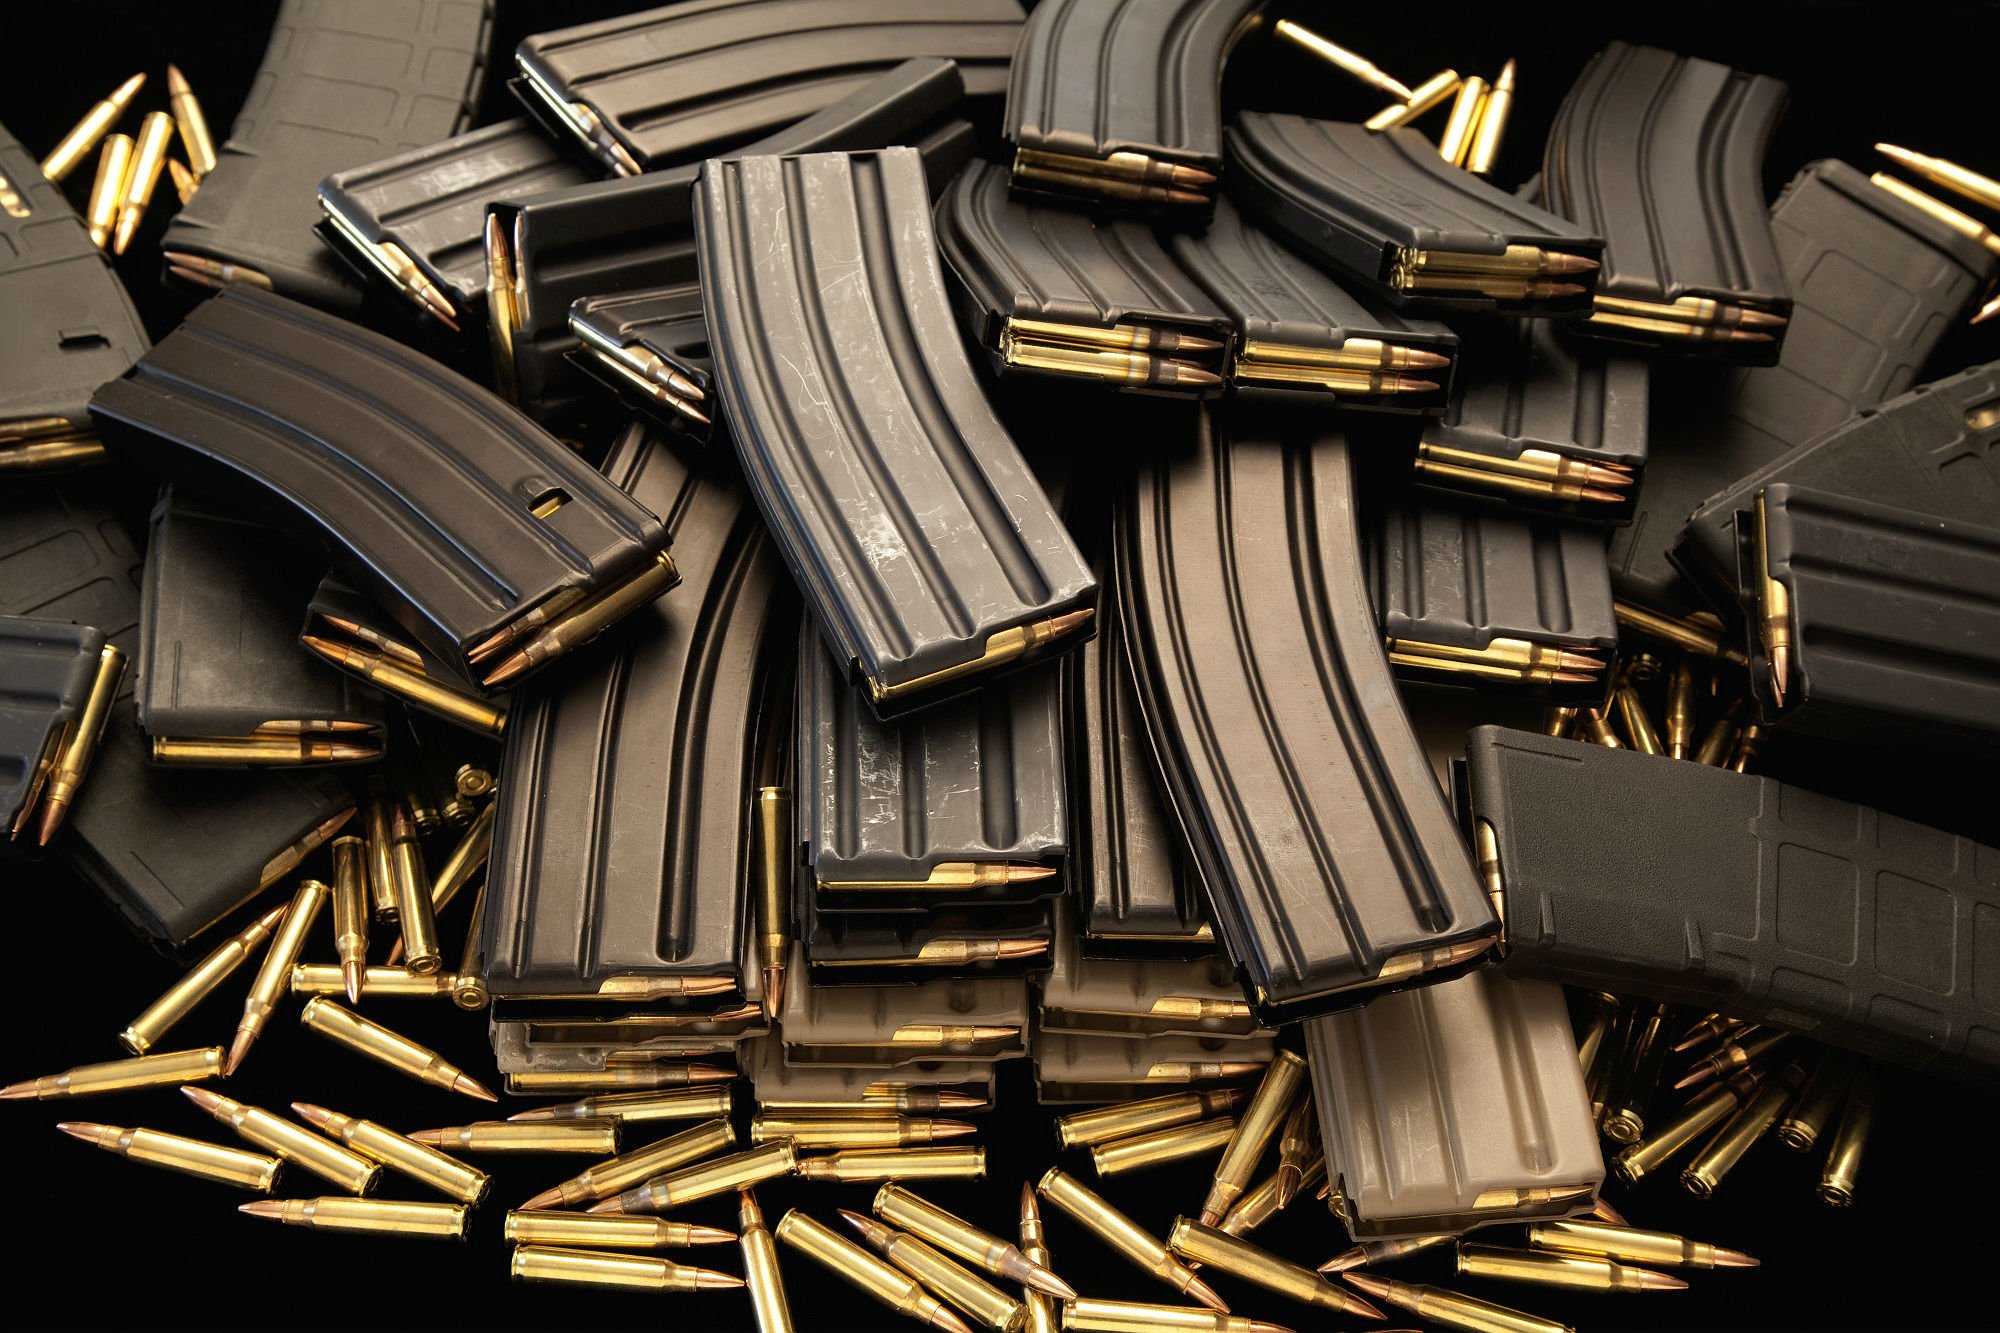 gun, Control, Weapon, Politics, Anarchy, Protest, Political, Weapons, Guns, Ammo, Ammunition, Military, Police Wallpaper